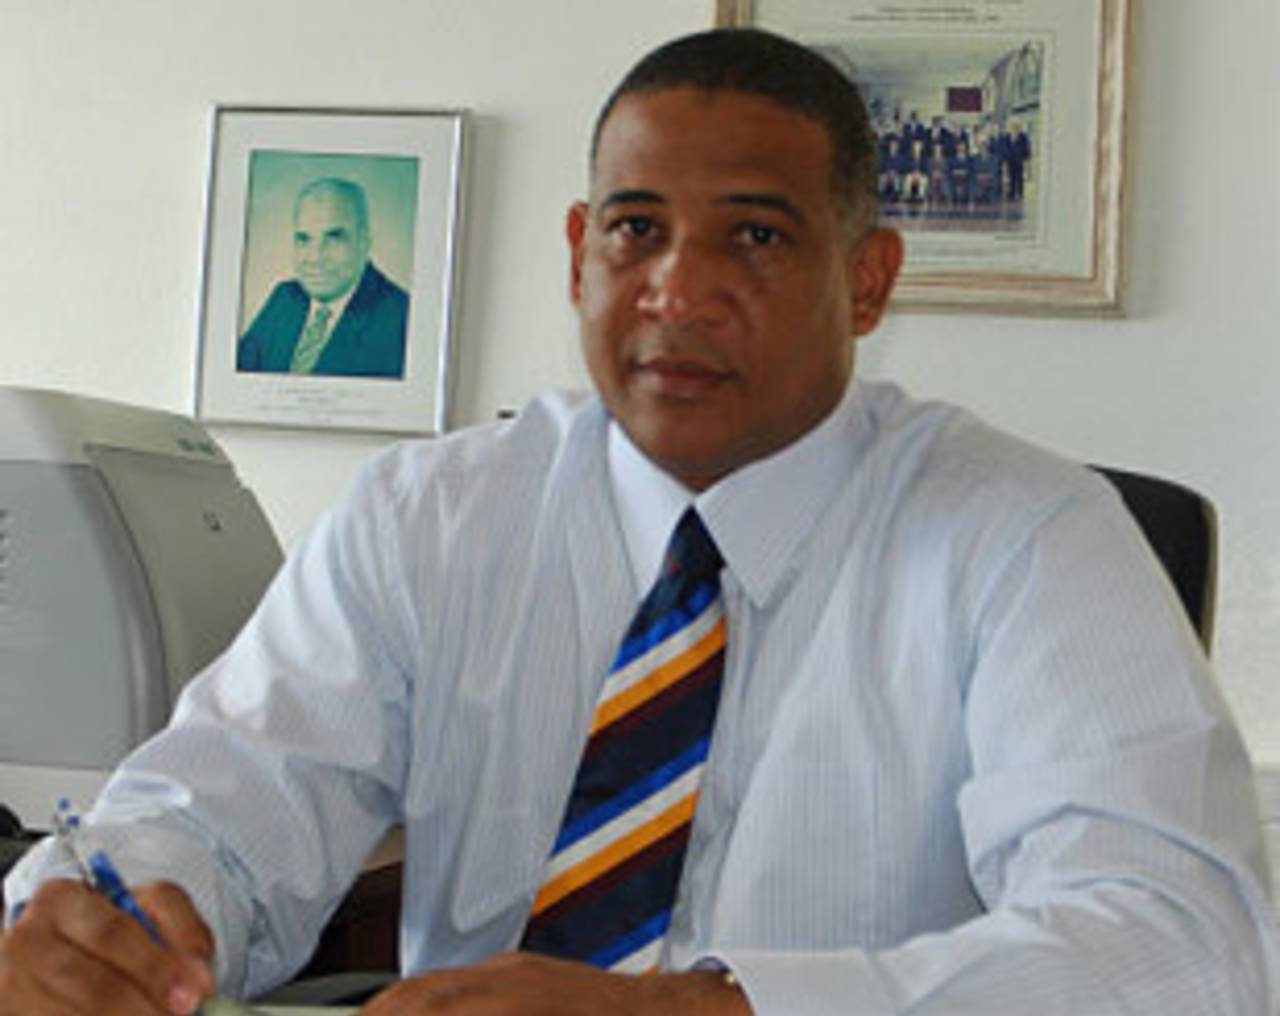 WICB chief executive Ernest Hilaire aims to be proactive in protecting the game's integrity&nbsp;&nbsp;&bull;&nbsp;&nbsp;West Indies Cricket Board